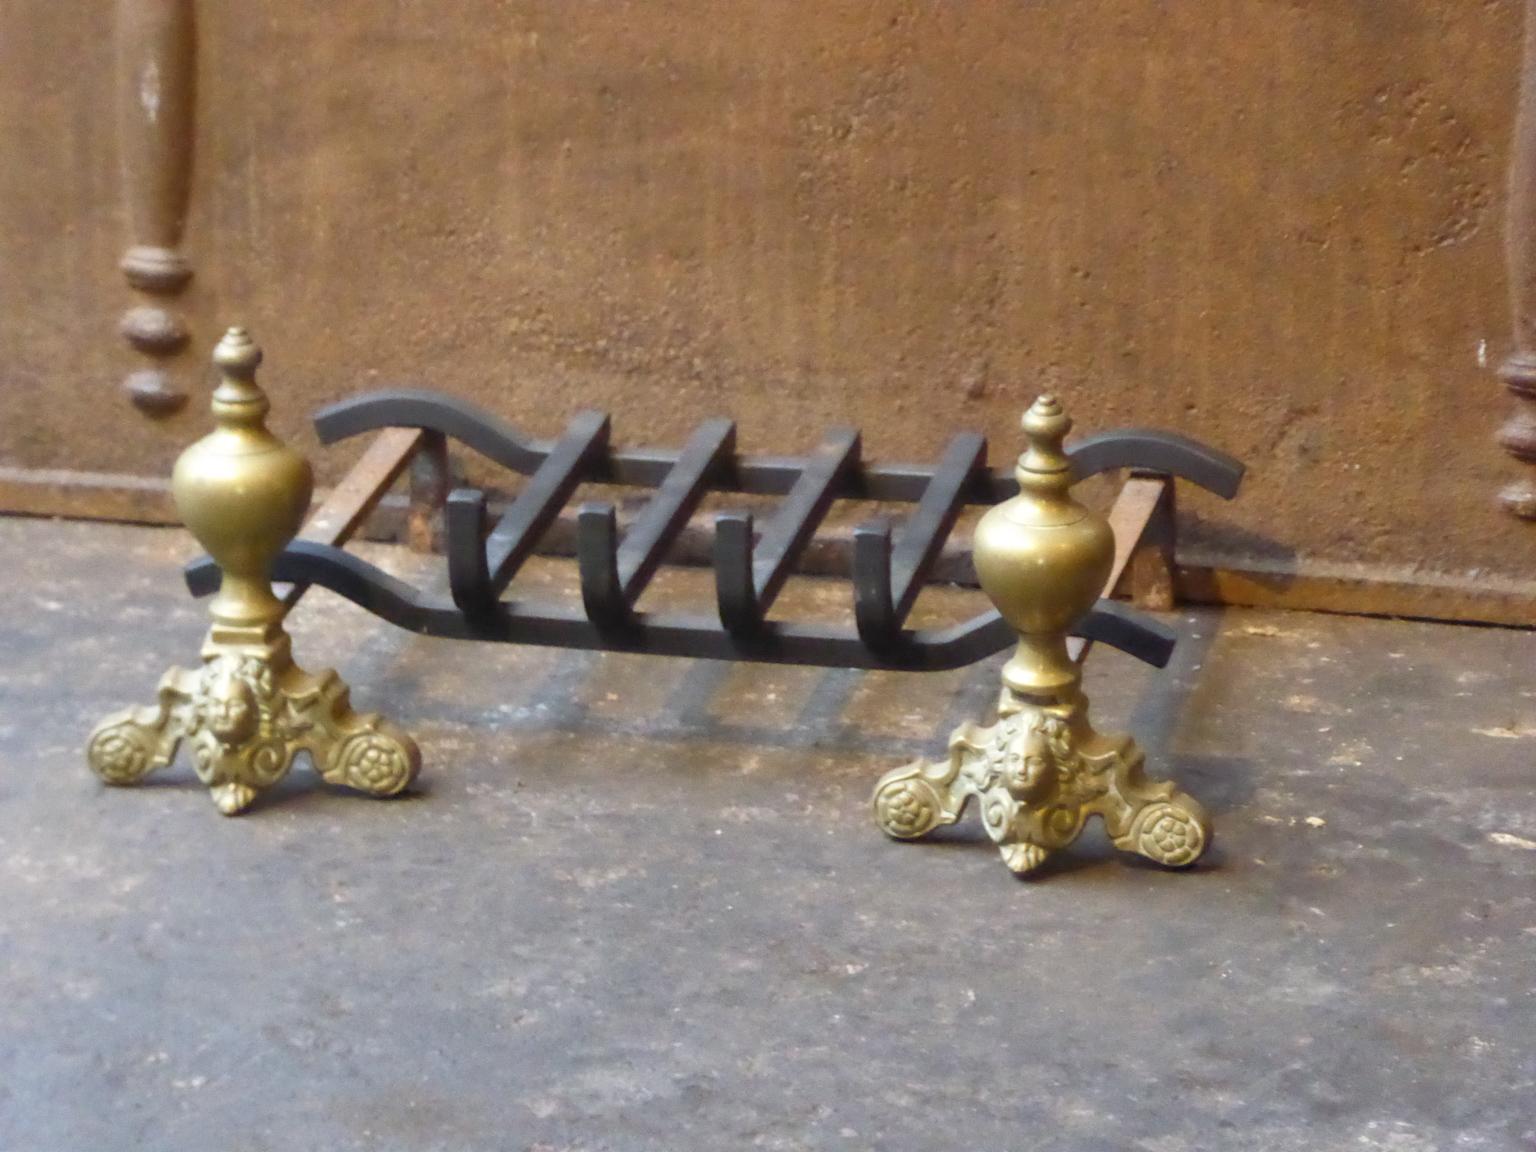 20th century French Louis XIV style fireplace basket - fire basket made of brass and wrought iron. The total width of the front is 20.9 inch (53 cm)

The basket is in a good condition and is fully functional.